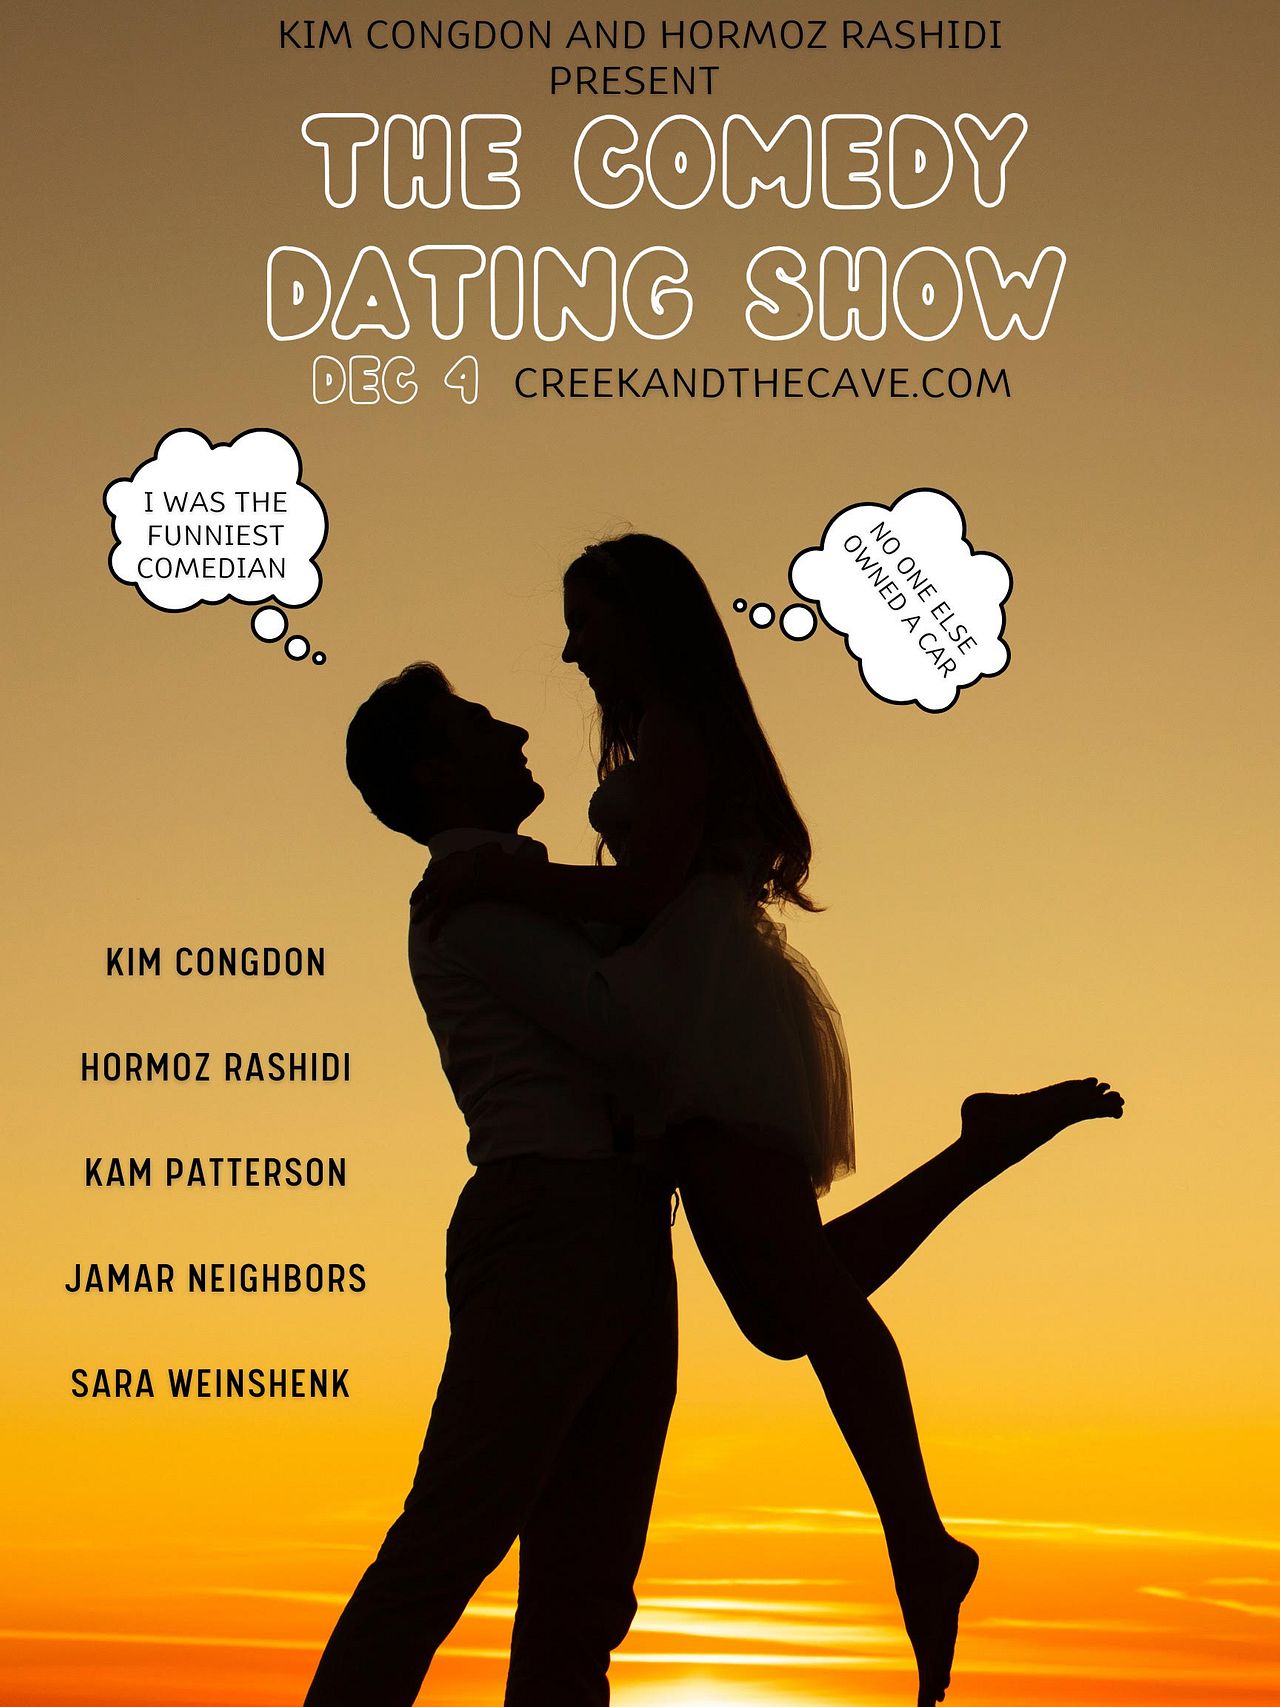 Dating in Austin: A Live Blind Dating Show in Austin at The Creek